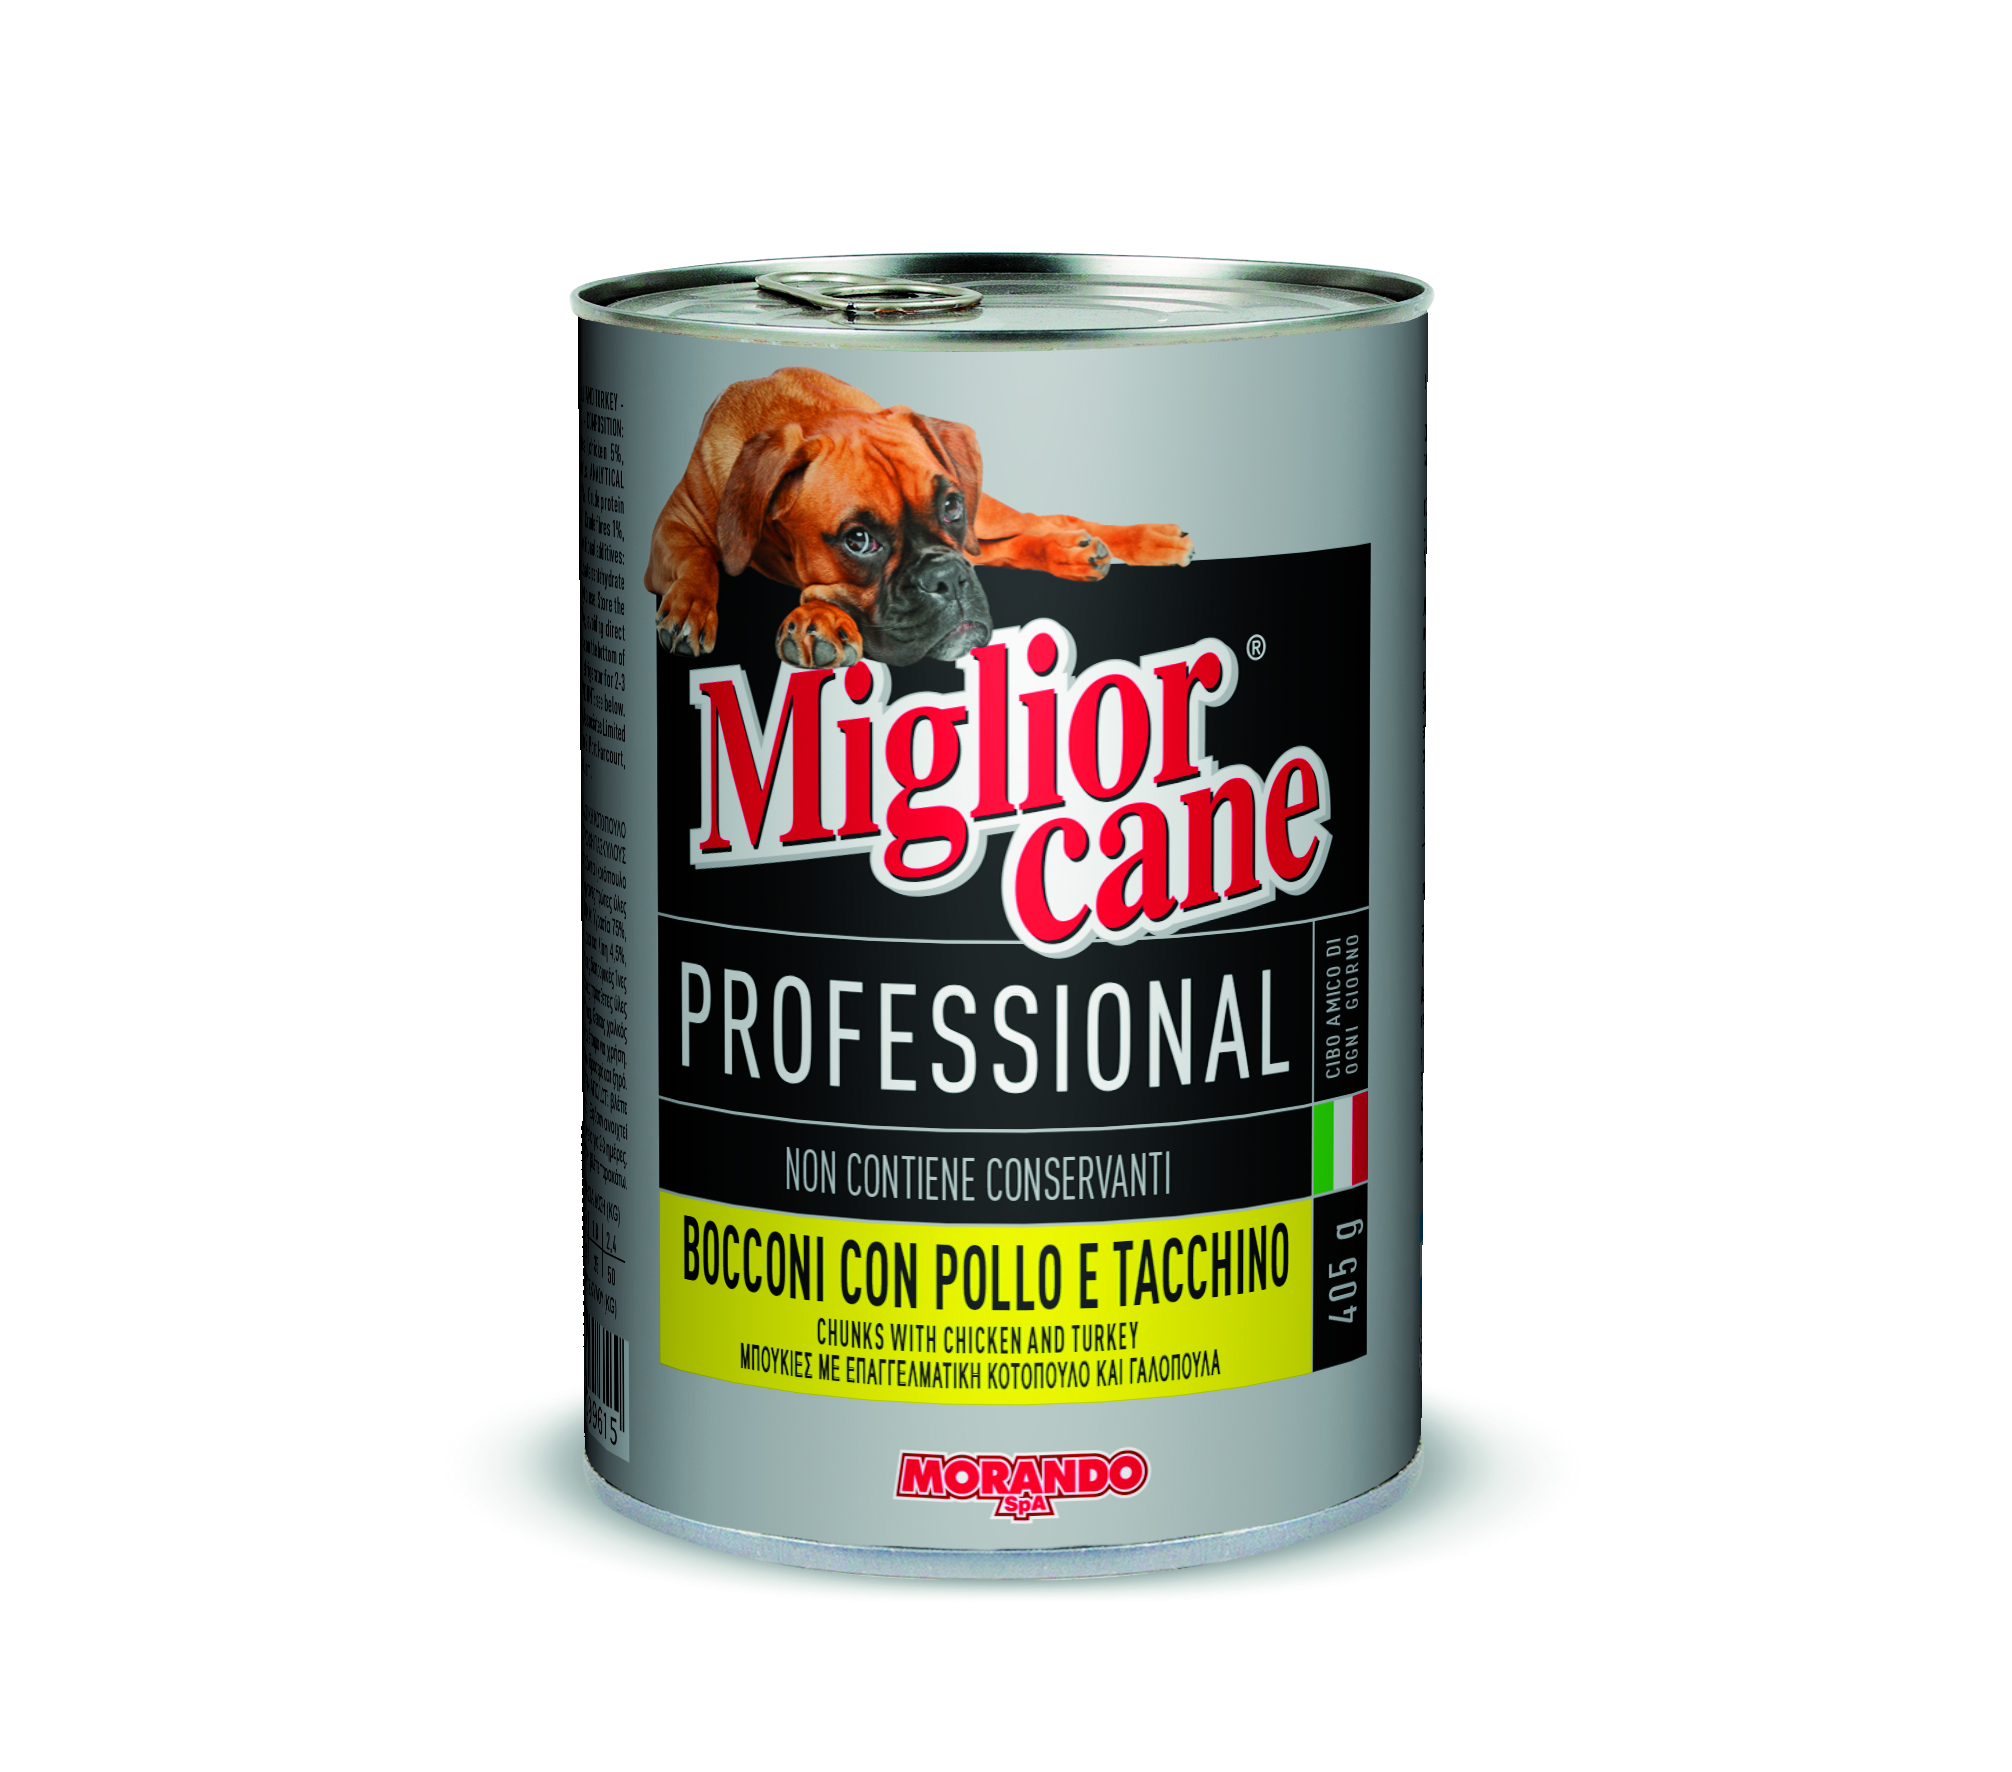 5. miglior cane professional chuncks with chicken and turkey   405 %d0%b3